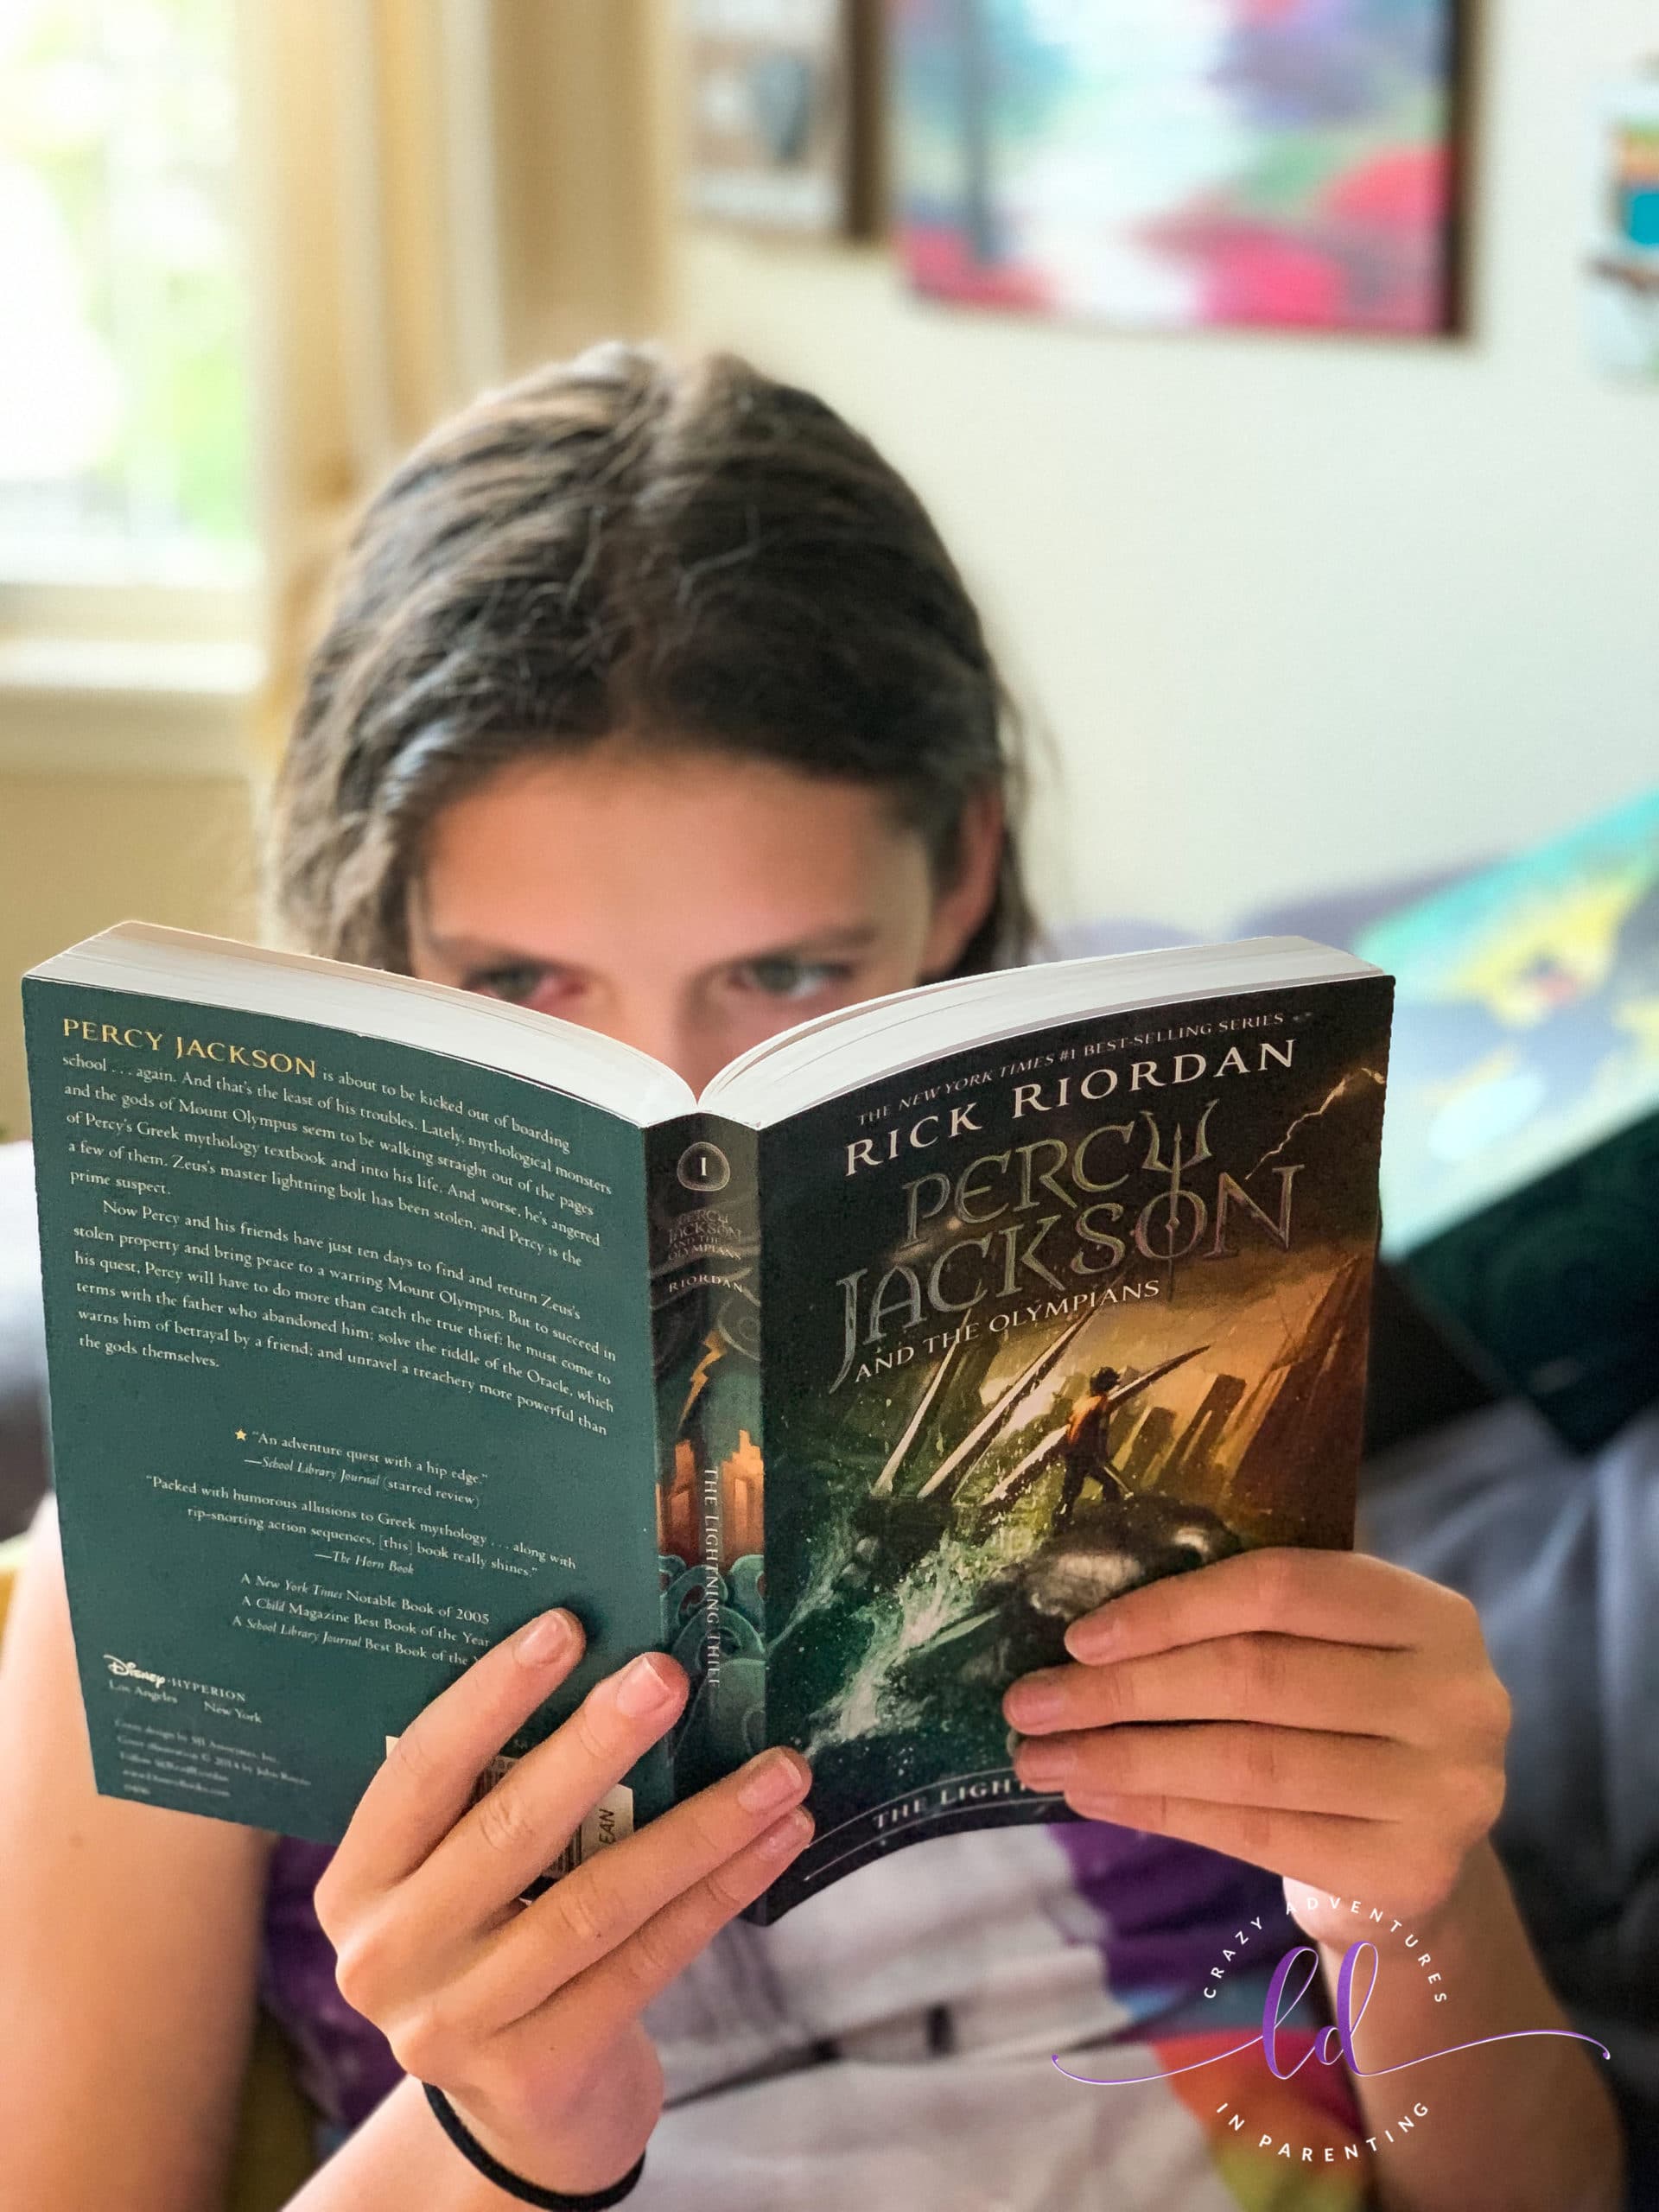 Percy Jackson & the Olympians series and giveaway